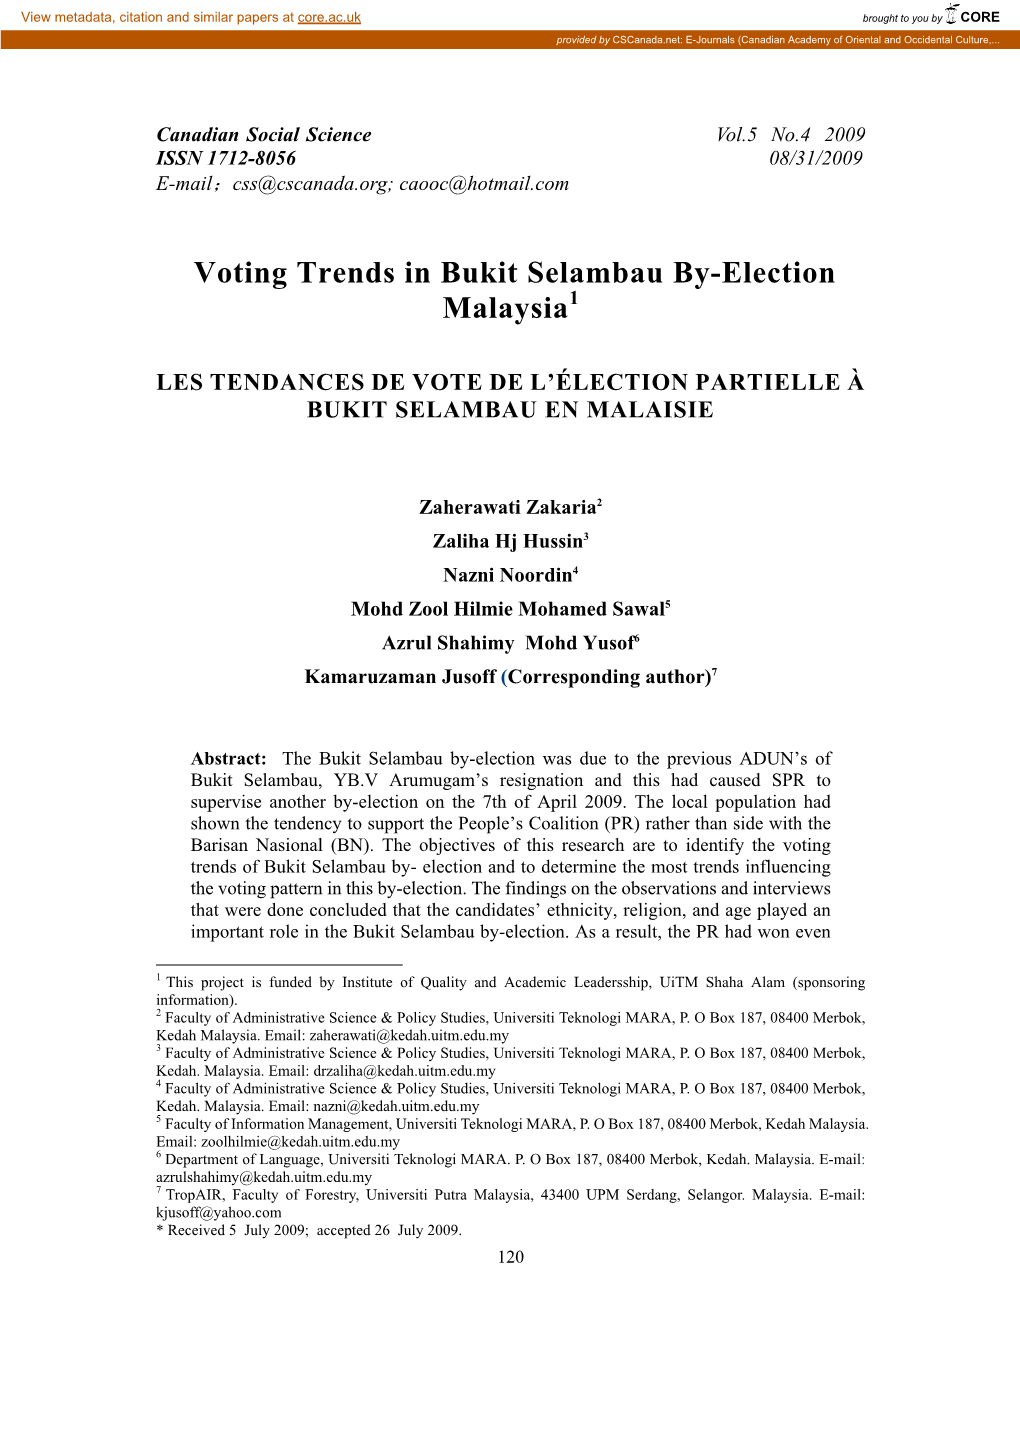 Voting Trends in Bukit Selambau By-Election Malaysia1